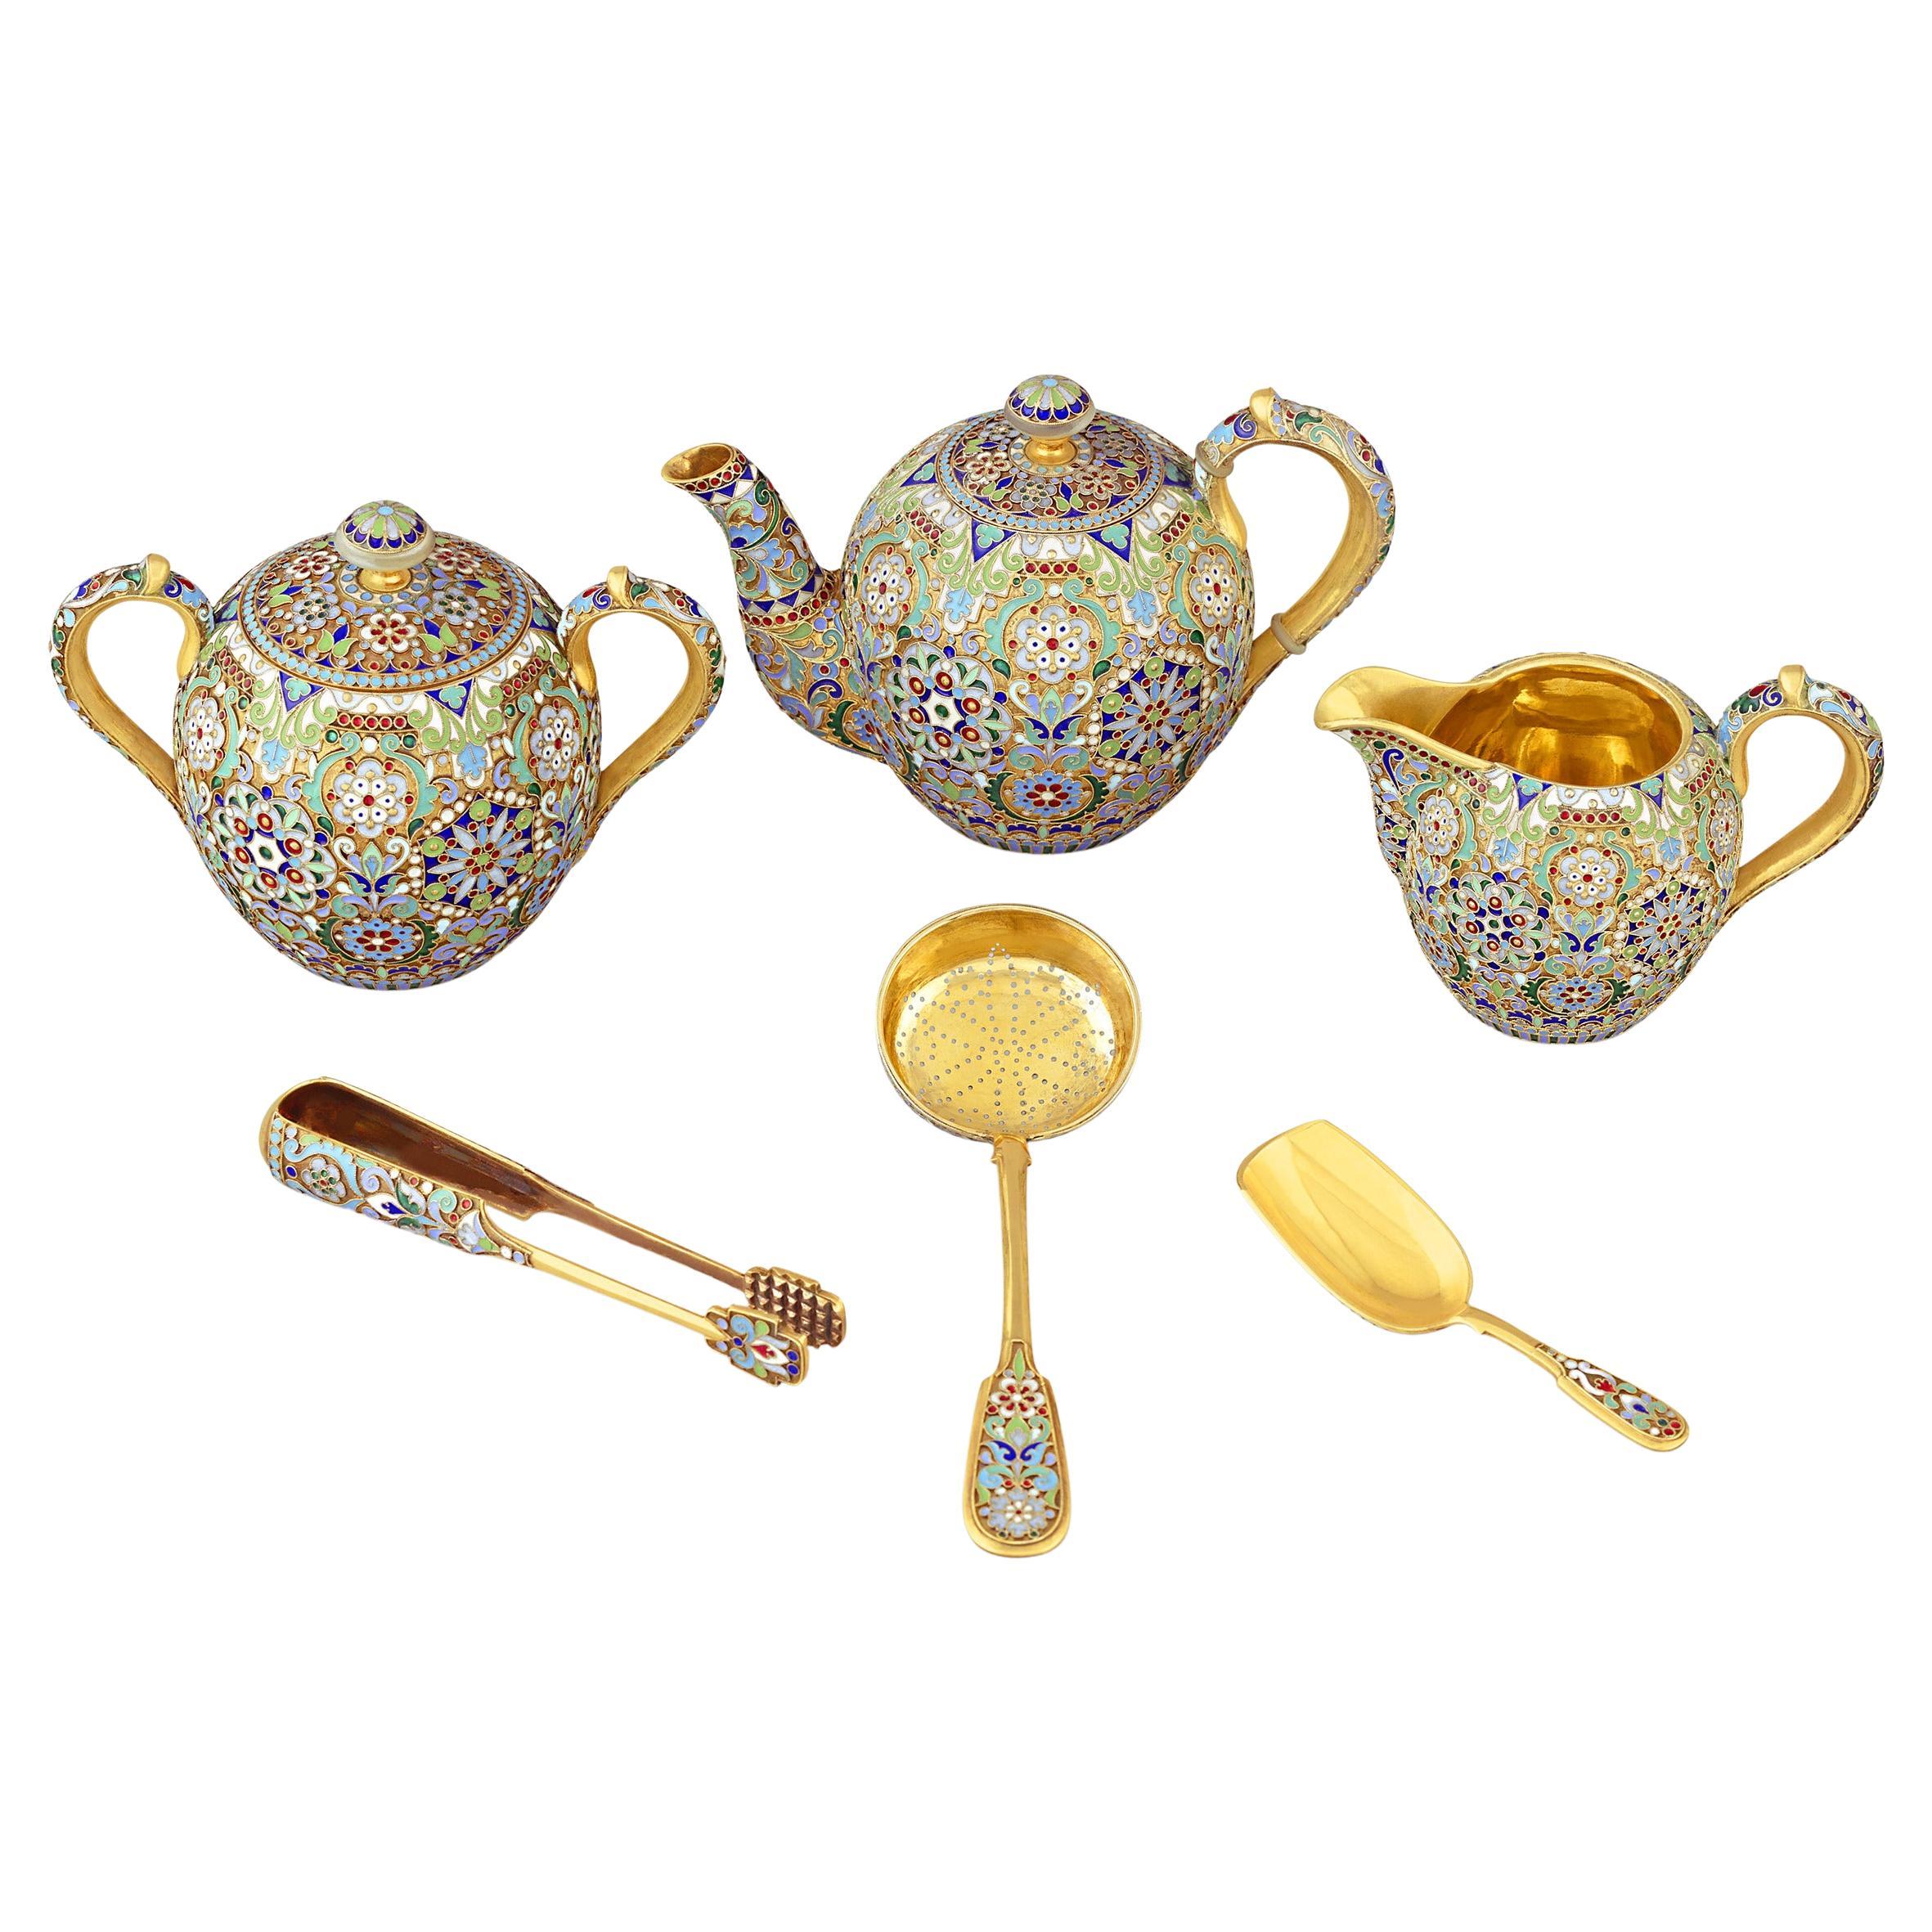 Russisches Cloisonné-Emaille-Teeset